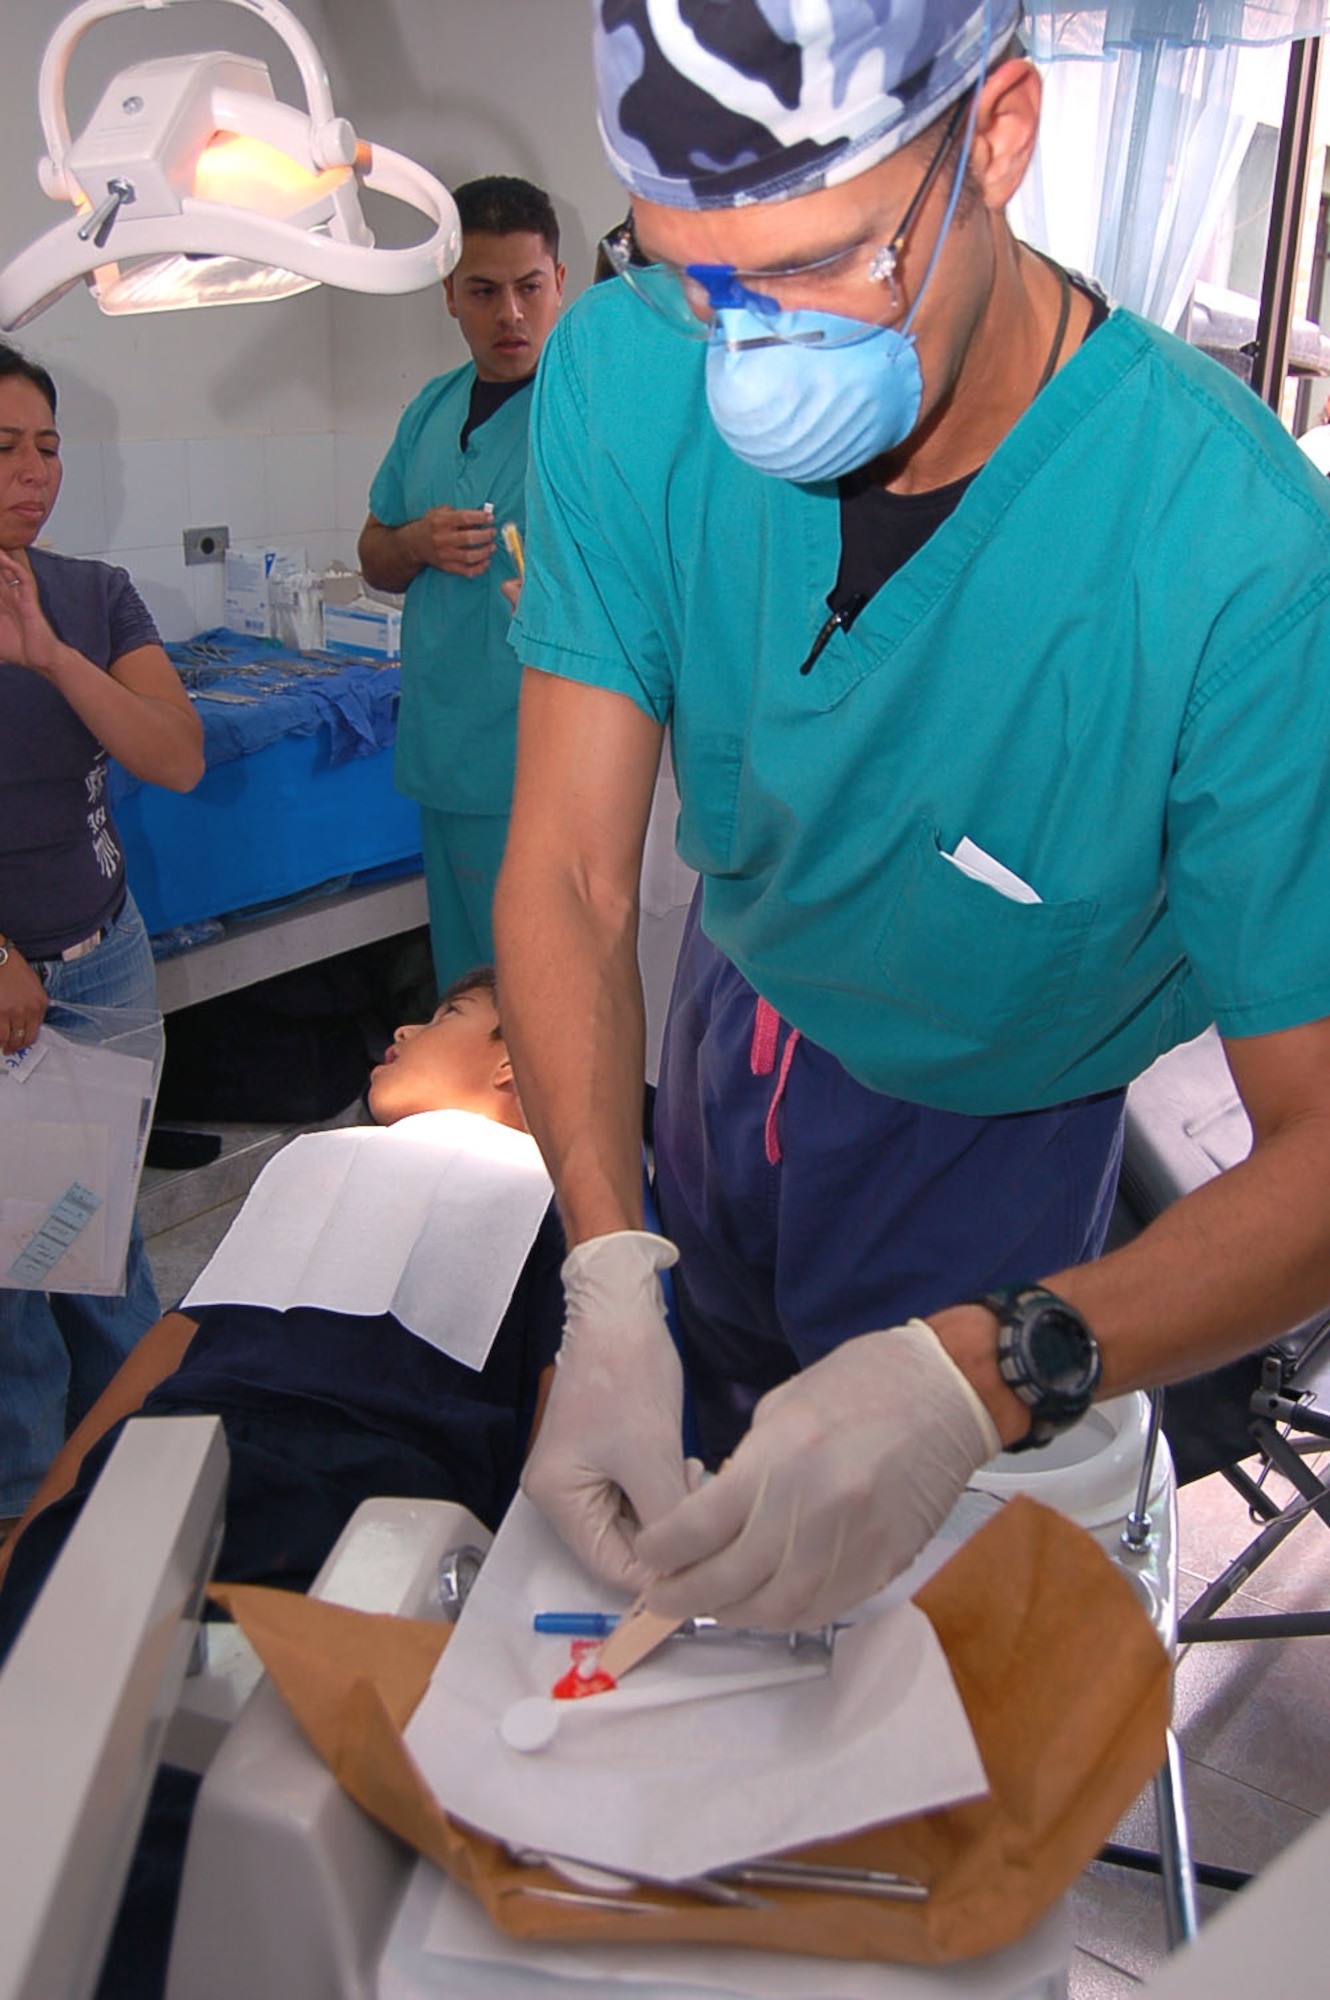 Lt. Col. (Dr.) Gary Geracci prepares to remove a decayed tooth from the mouth of a Colombian boy at the Hospital Toribo Maya in Popayan, Colombia, Sept. 12. The colonel is one of 14 members of a medical team sent to Colombia to participate in a medical readiness training exercise. He is an oral surgeon assigned to the 55th Medical Group at Offutt Air Force Base, Neb. (U.S. Air Force photo/Staff Sgt. Matthew Bates)